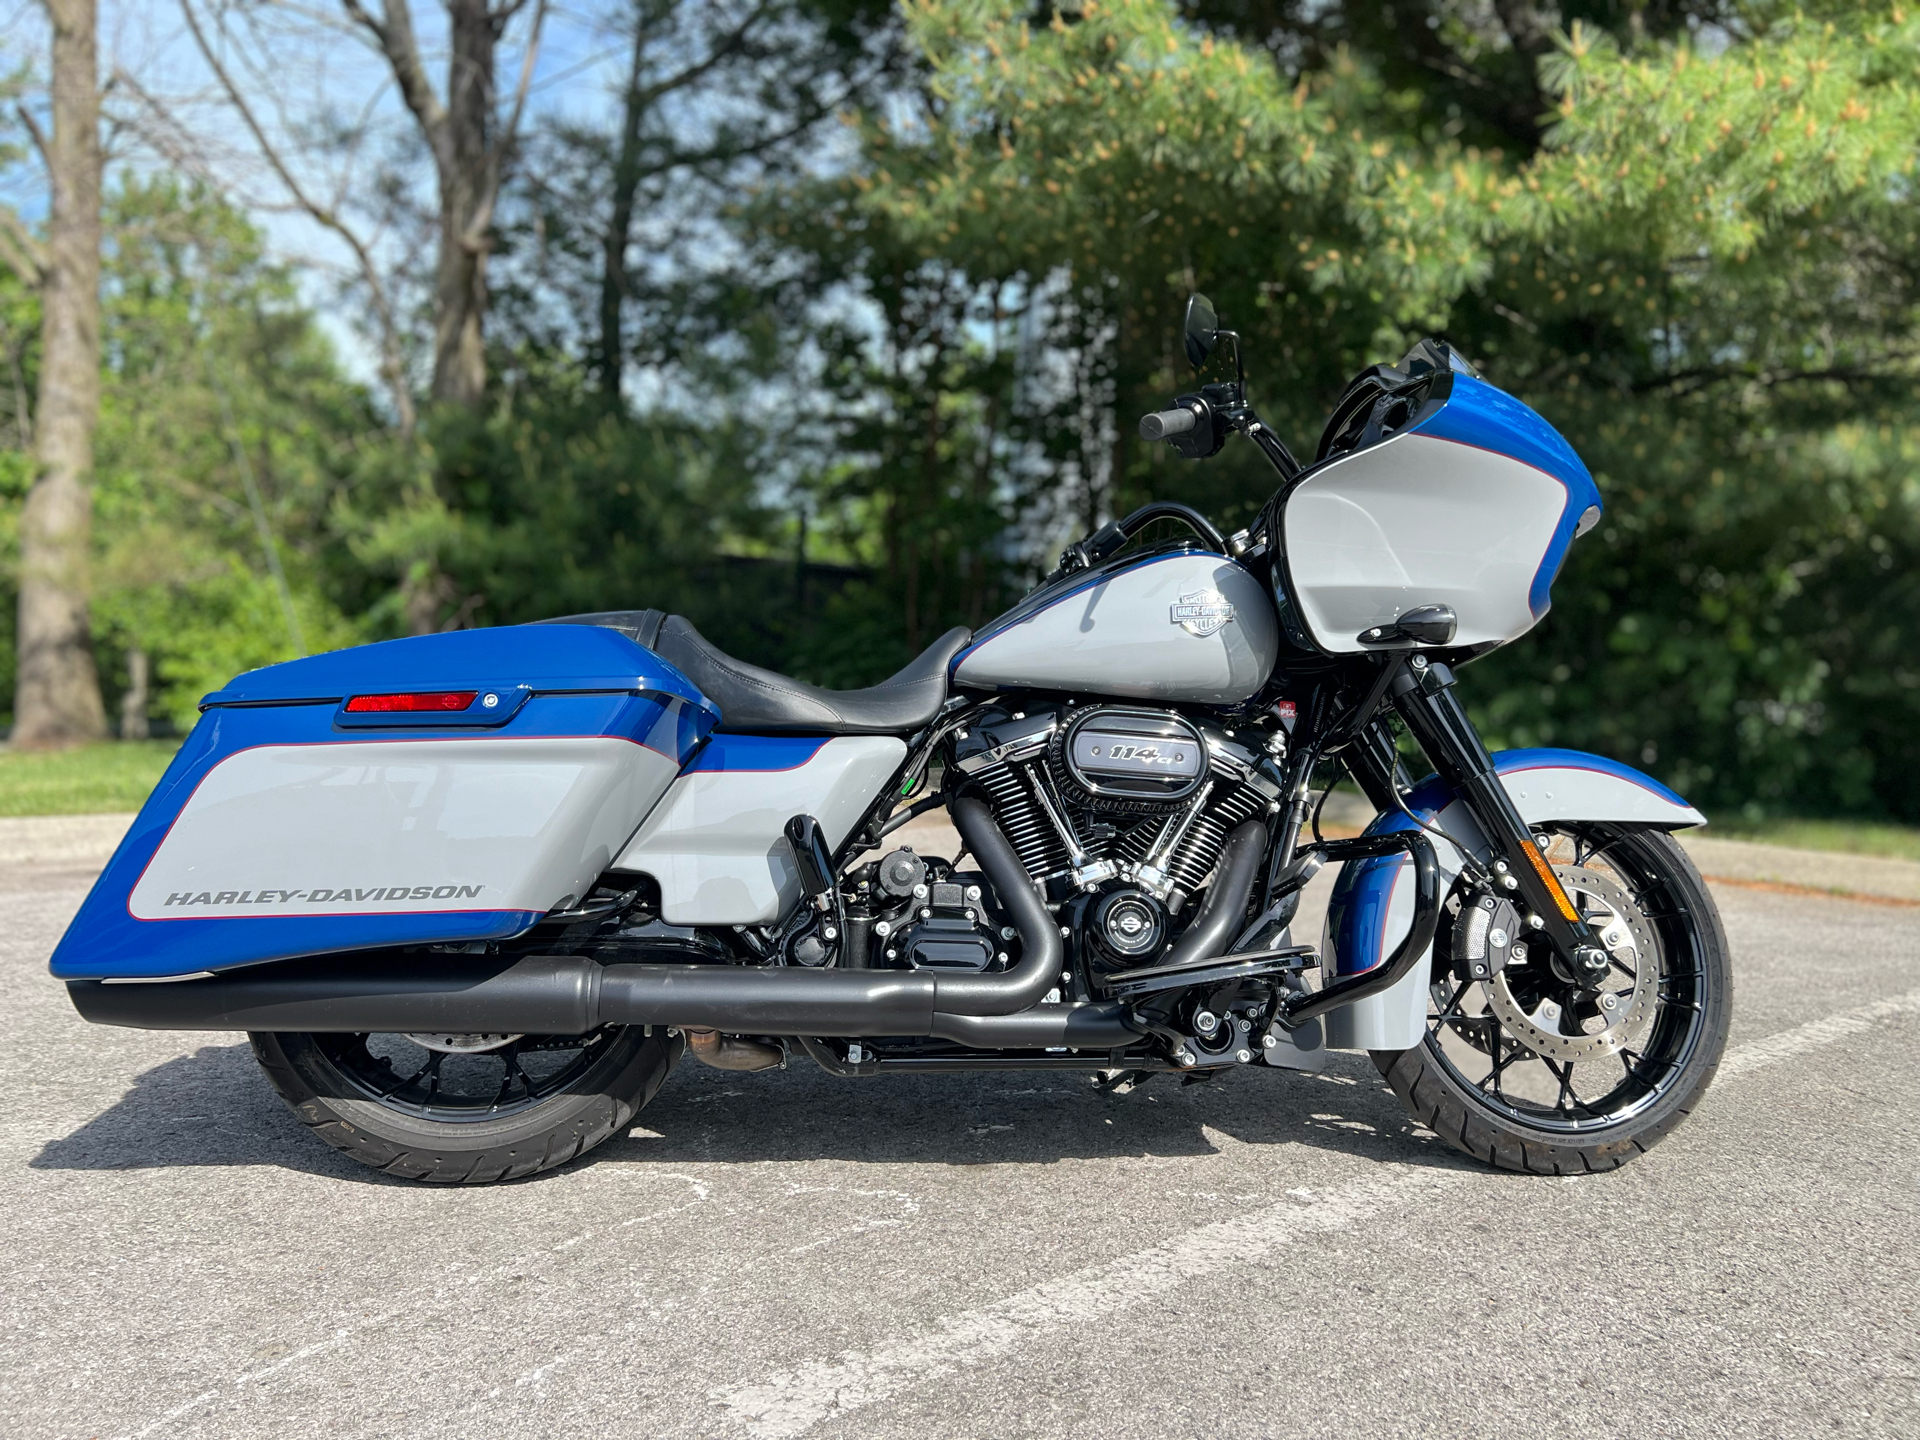 2023 Harley-Davidson Road Glide® Special in Franklin, Tennessee - Photo 1